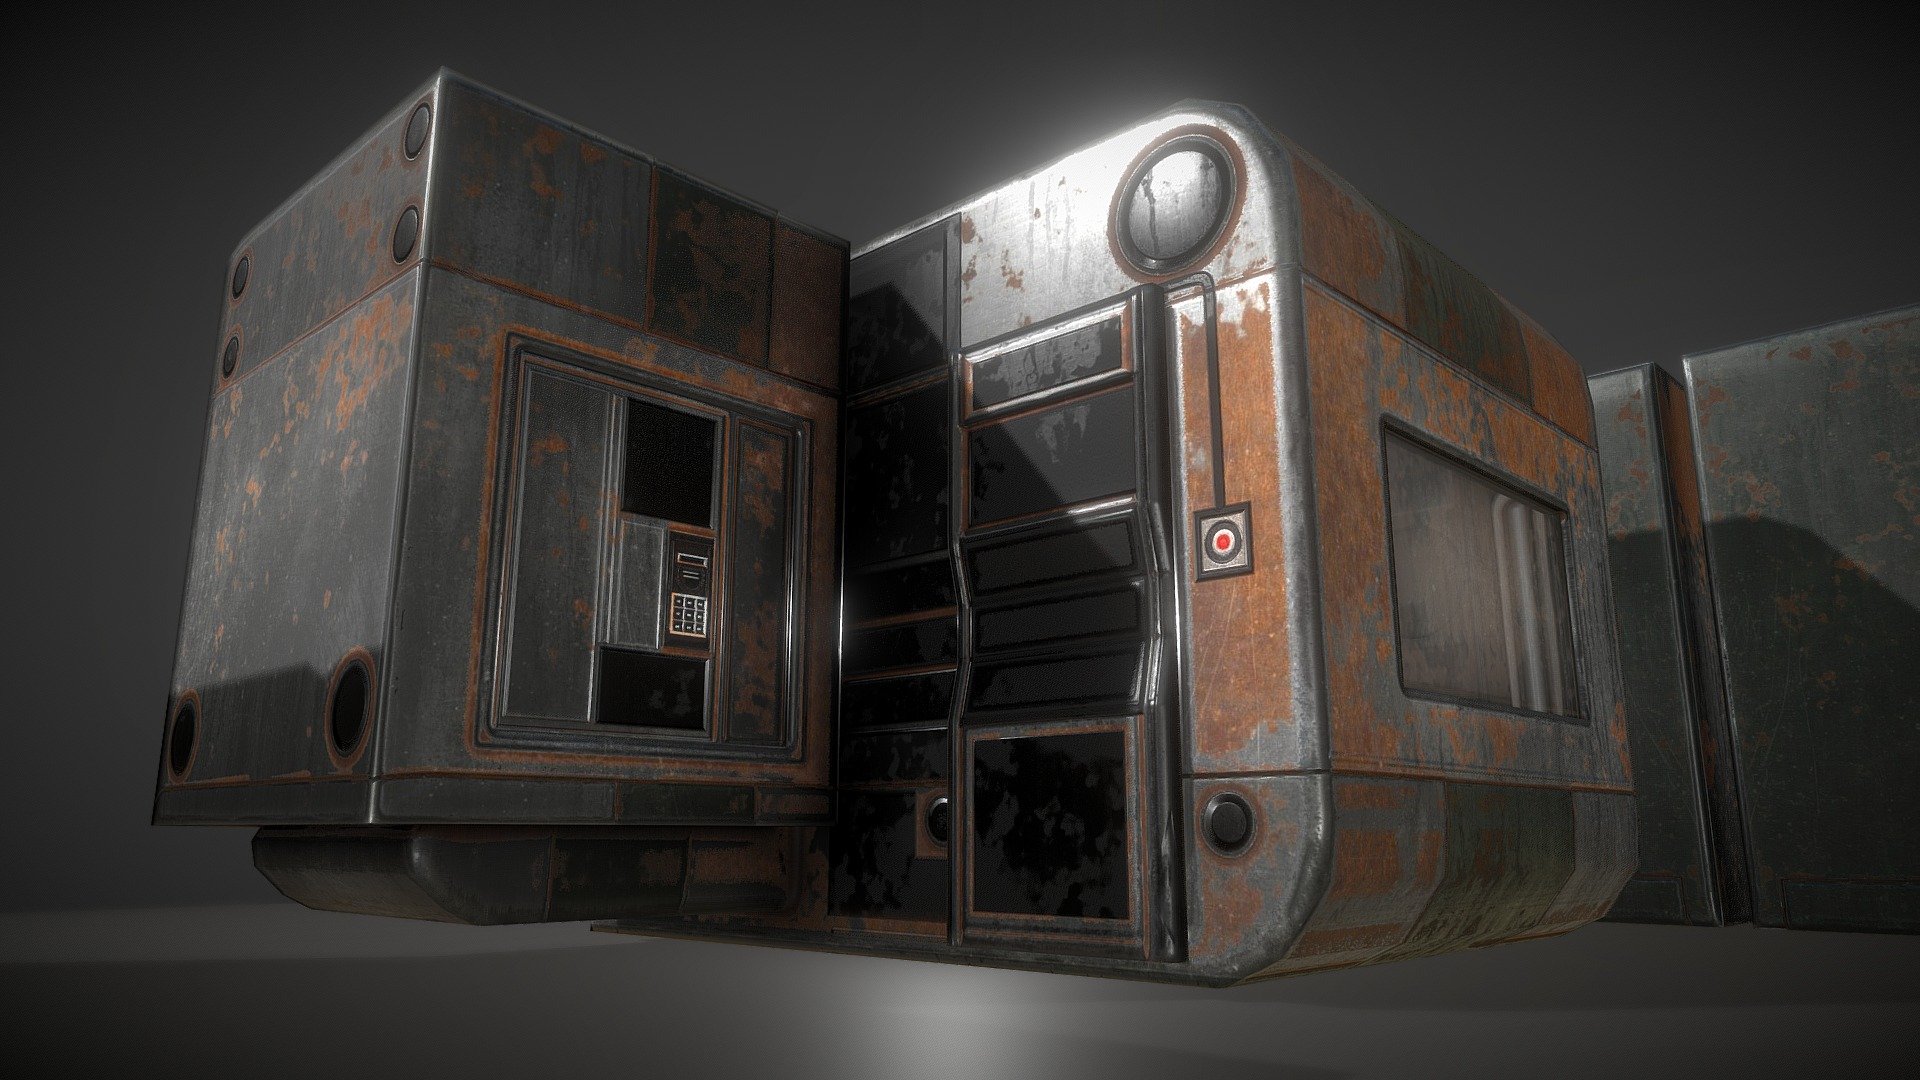 The old and rusty version of my futuristic living module.

Modeled, rigged and animated in Blender 2.78a 3d model